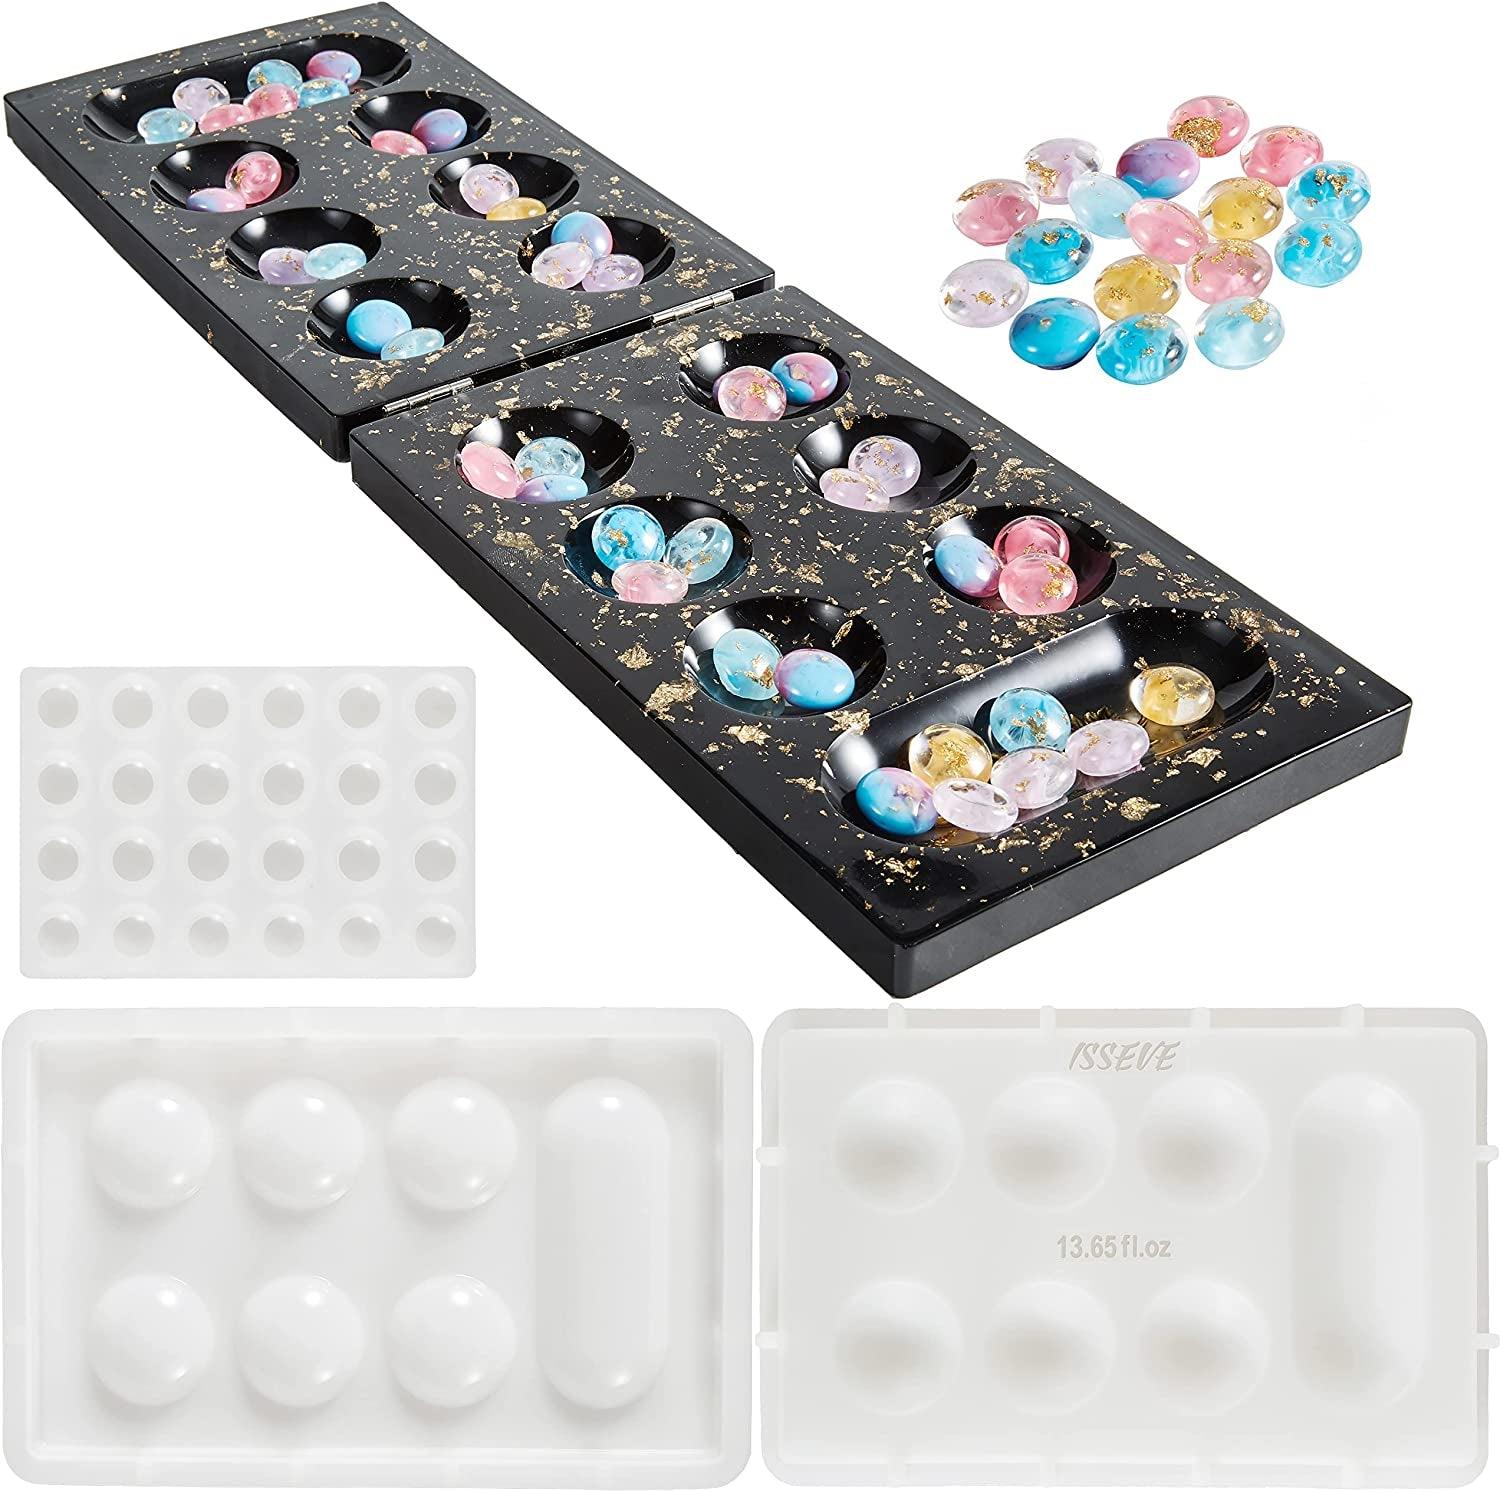 Silicone Mold For Epoxy Resin Set Jewelry Casting Mould Kit with